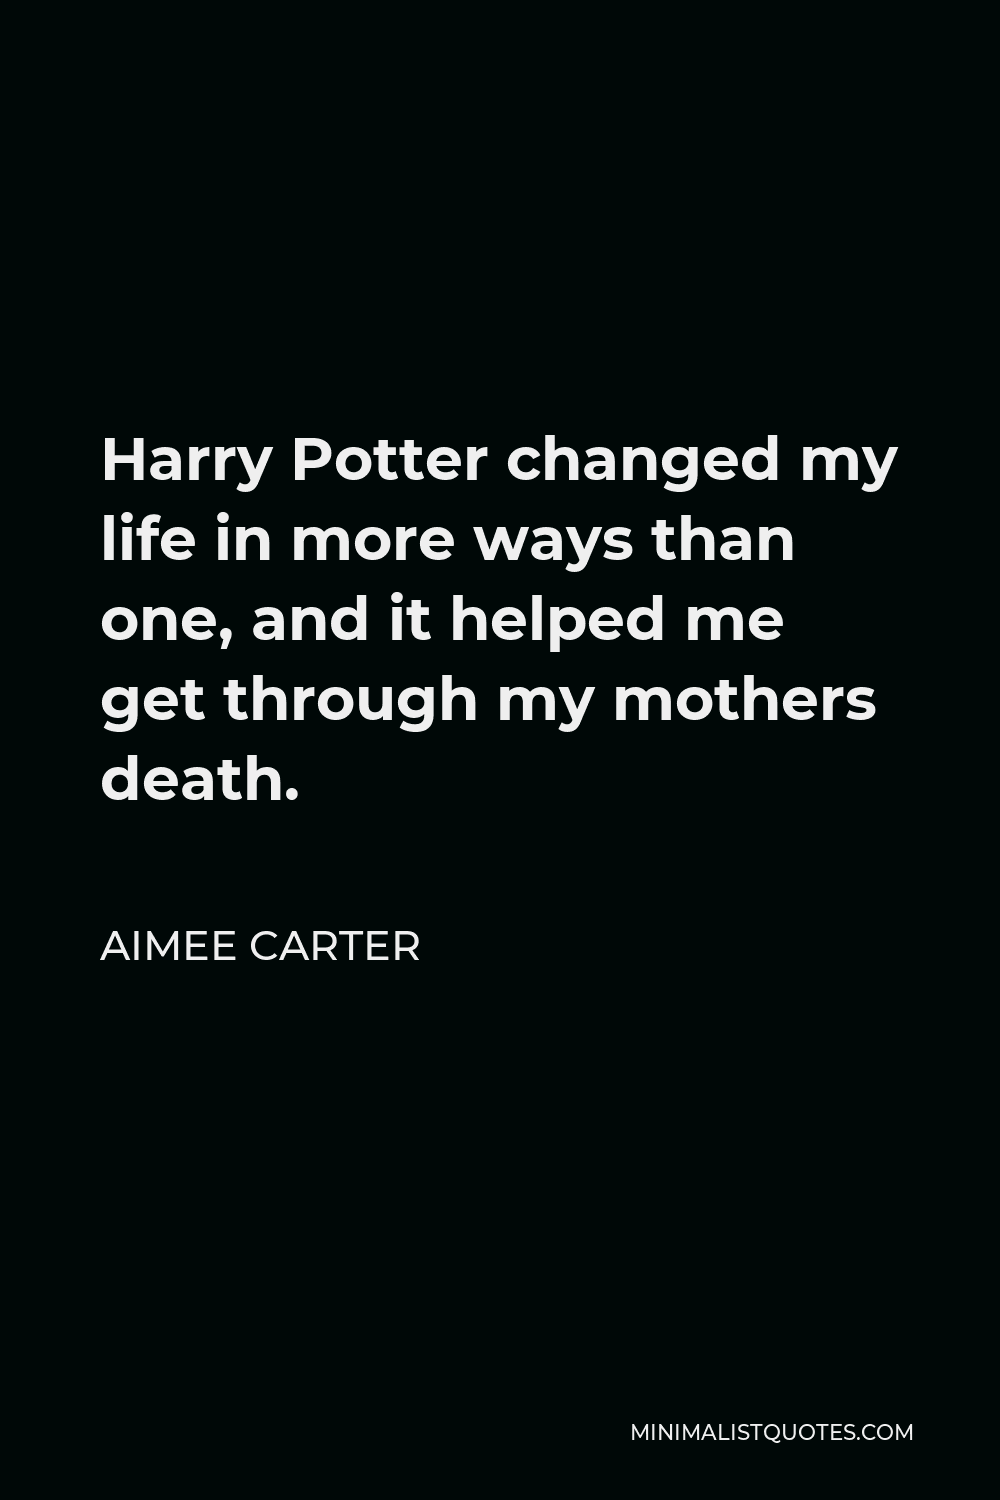 Aimee Carter Quote - Harry Potter changed my life in more ways than one, and it helped me get through my mothers death.